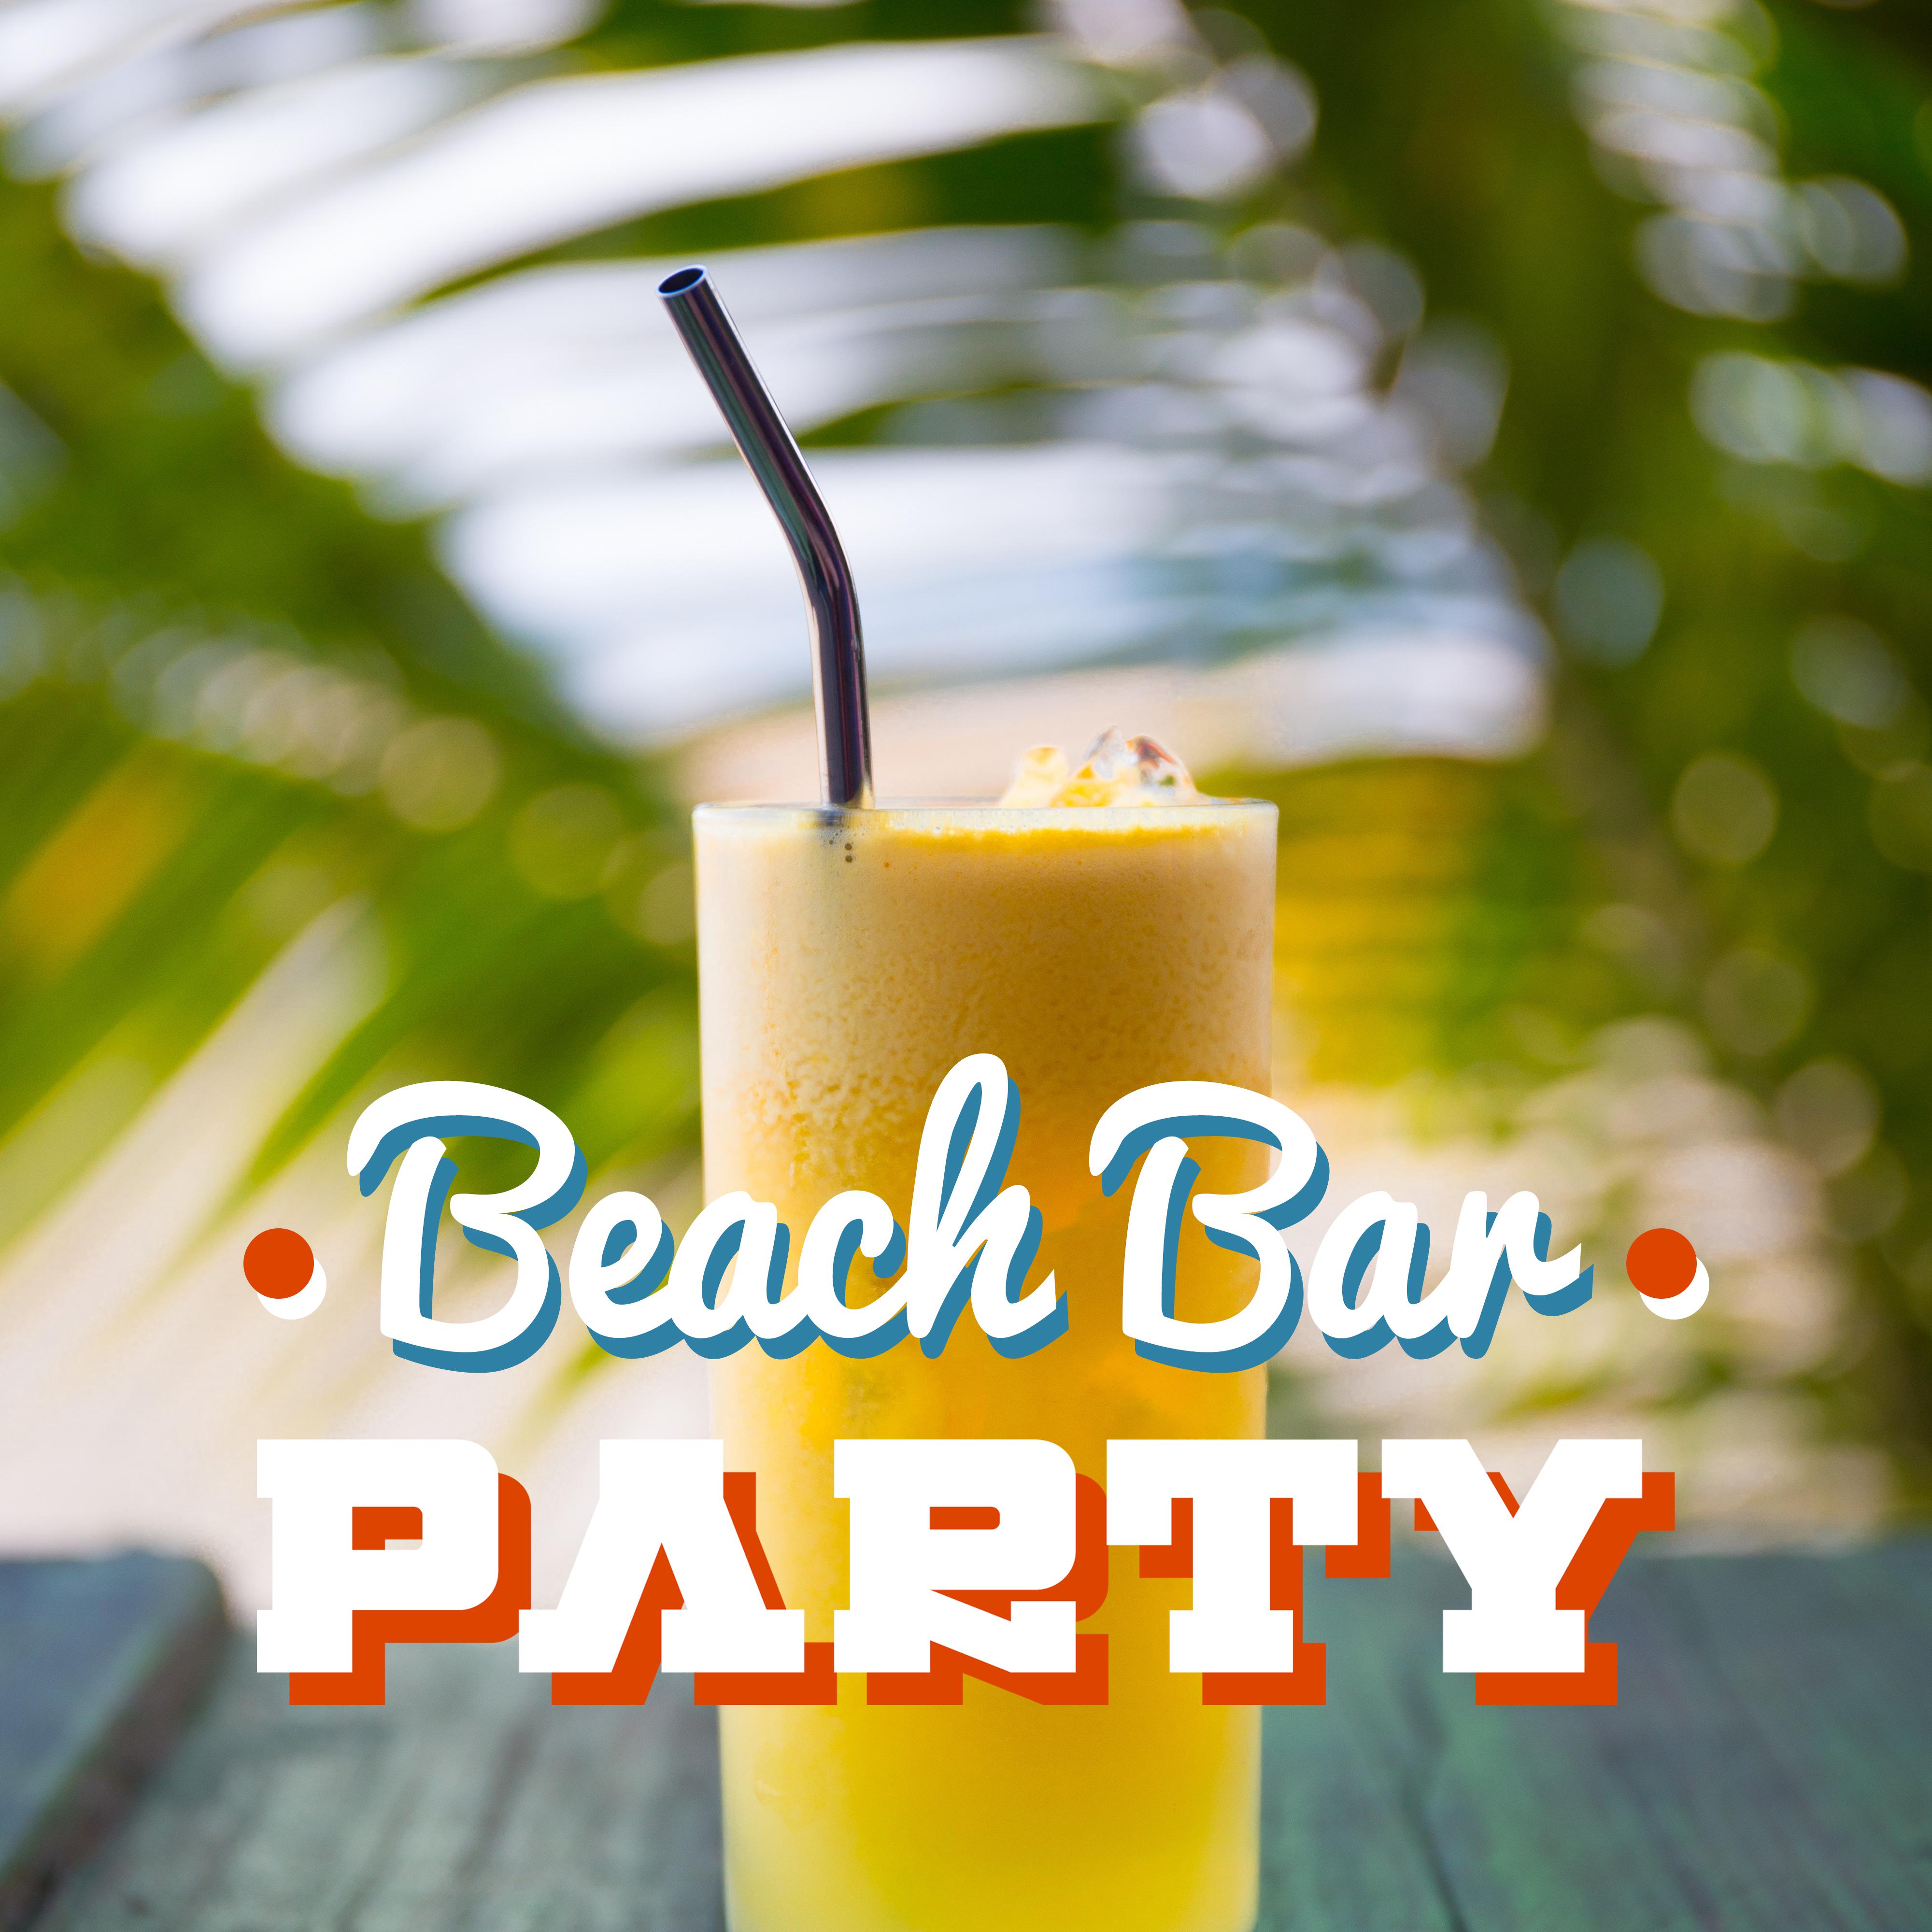 Beach Bar Party: Ibiza Chill Out, Relax, Chillout Lounge, Summer Hits 2019, Lounge, Ambient Music